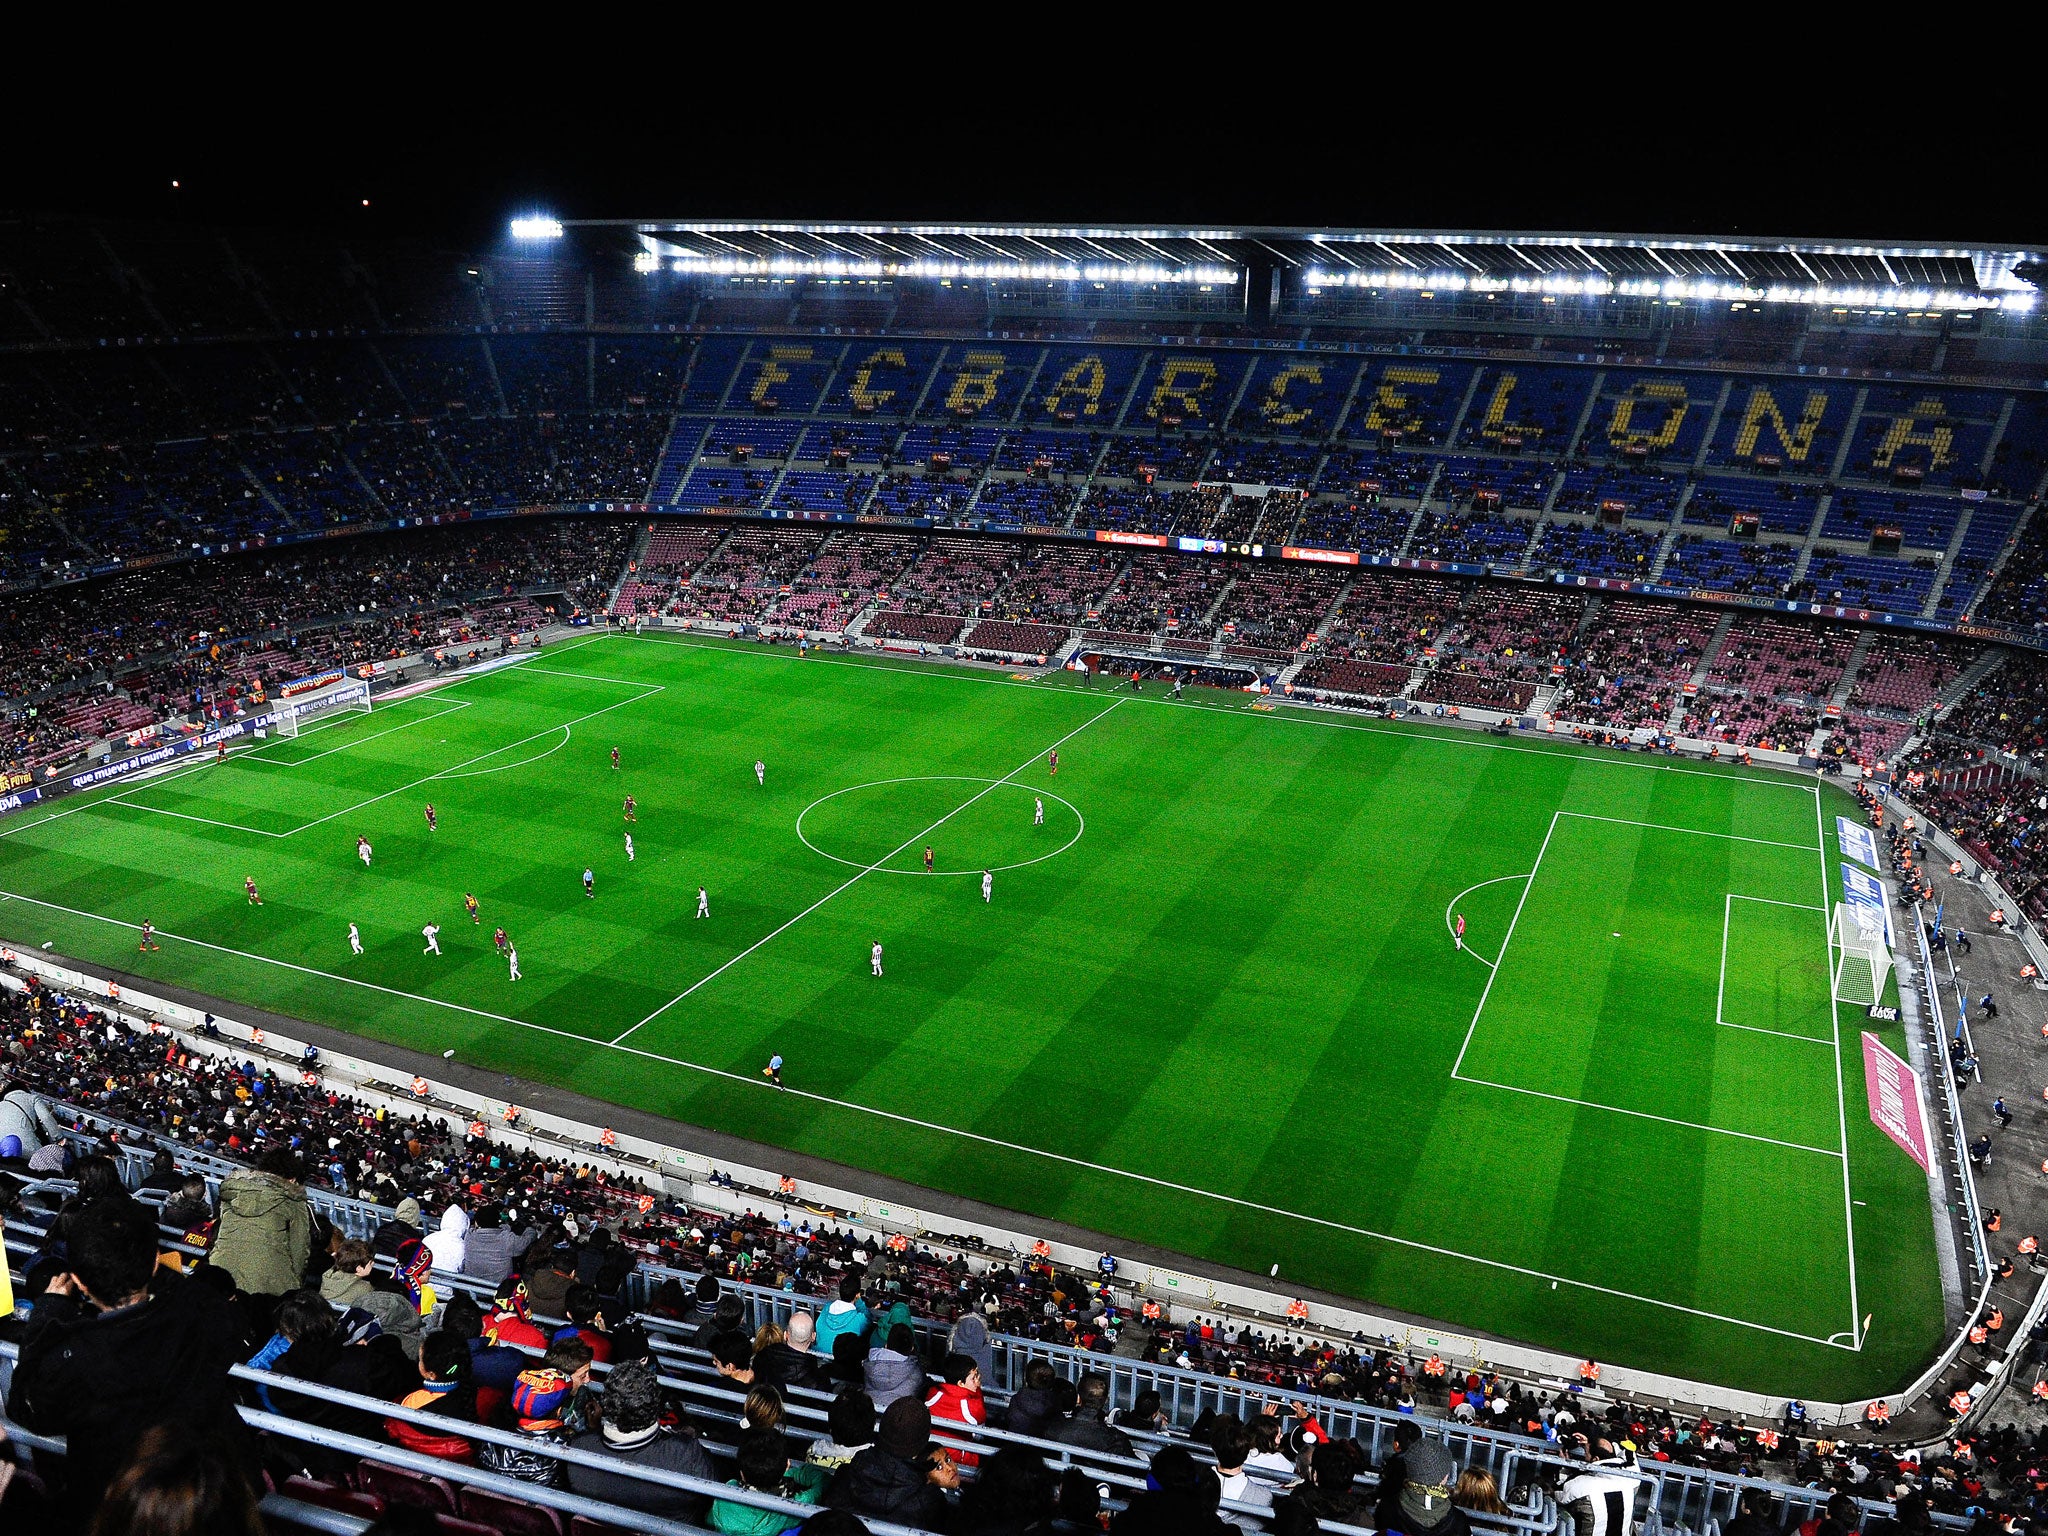 How the Nou Camp looks today